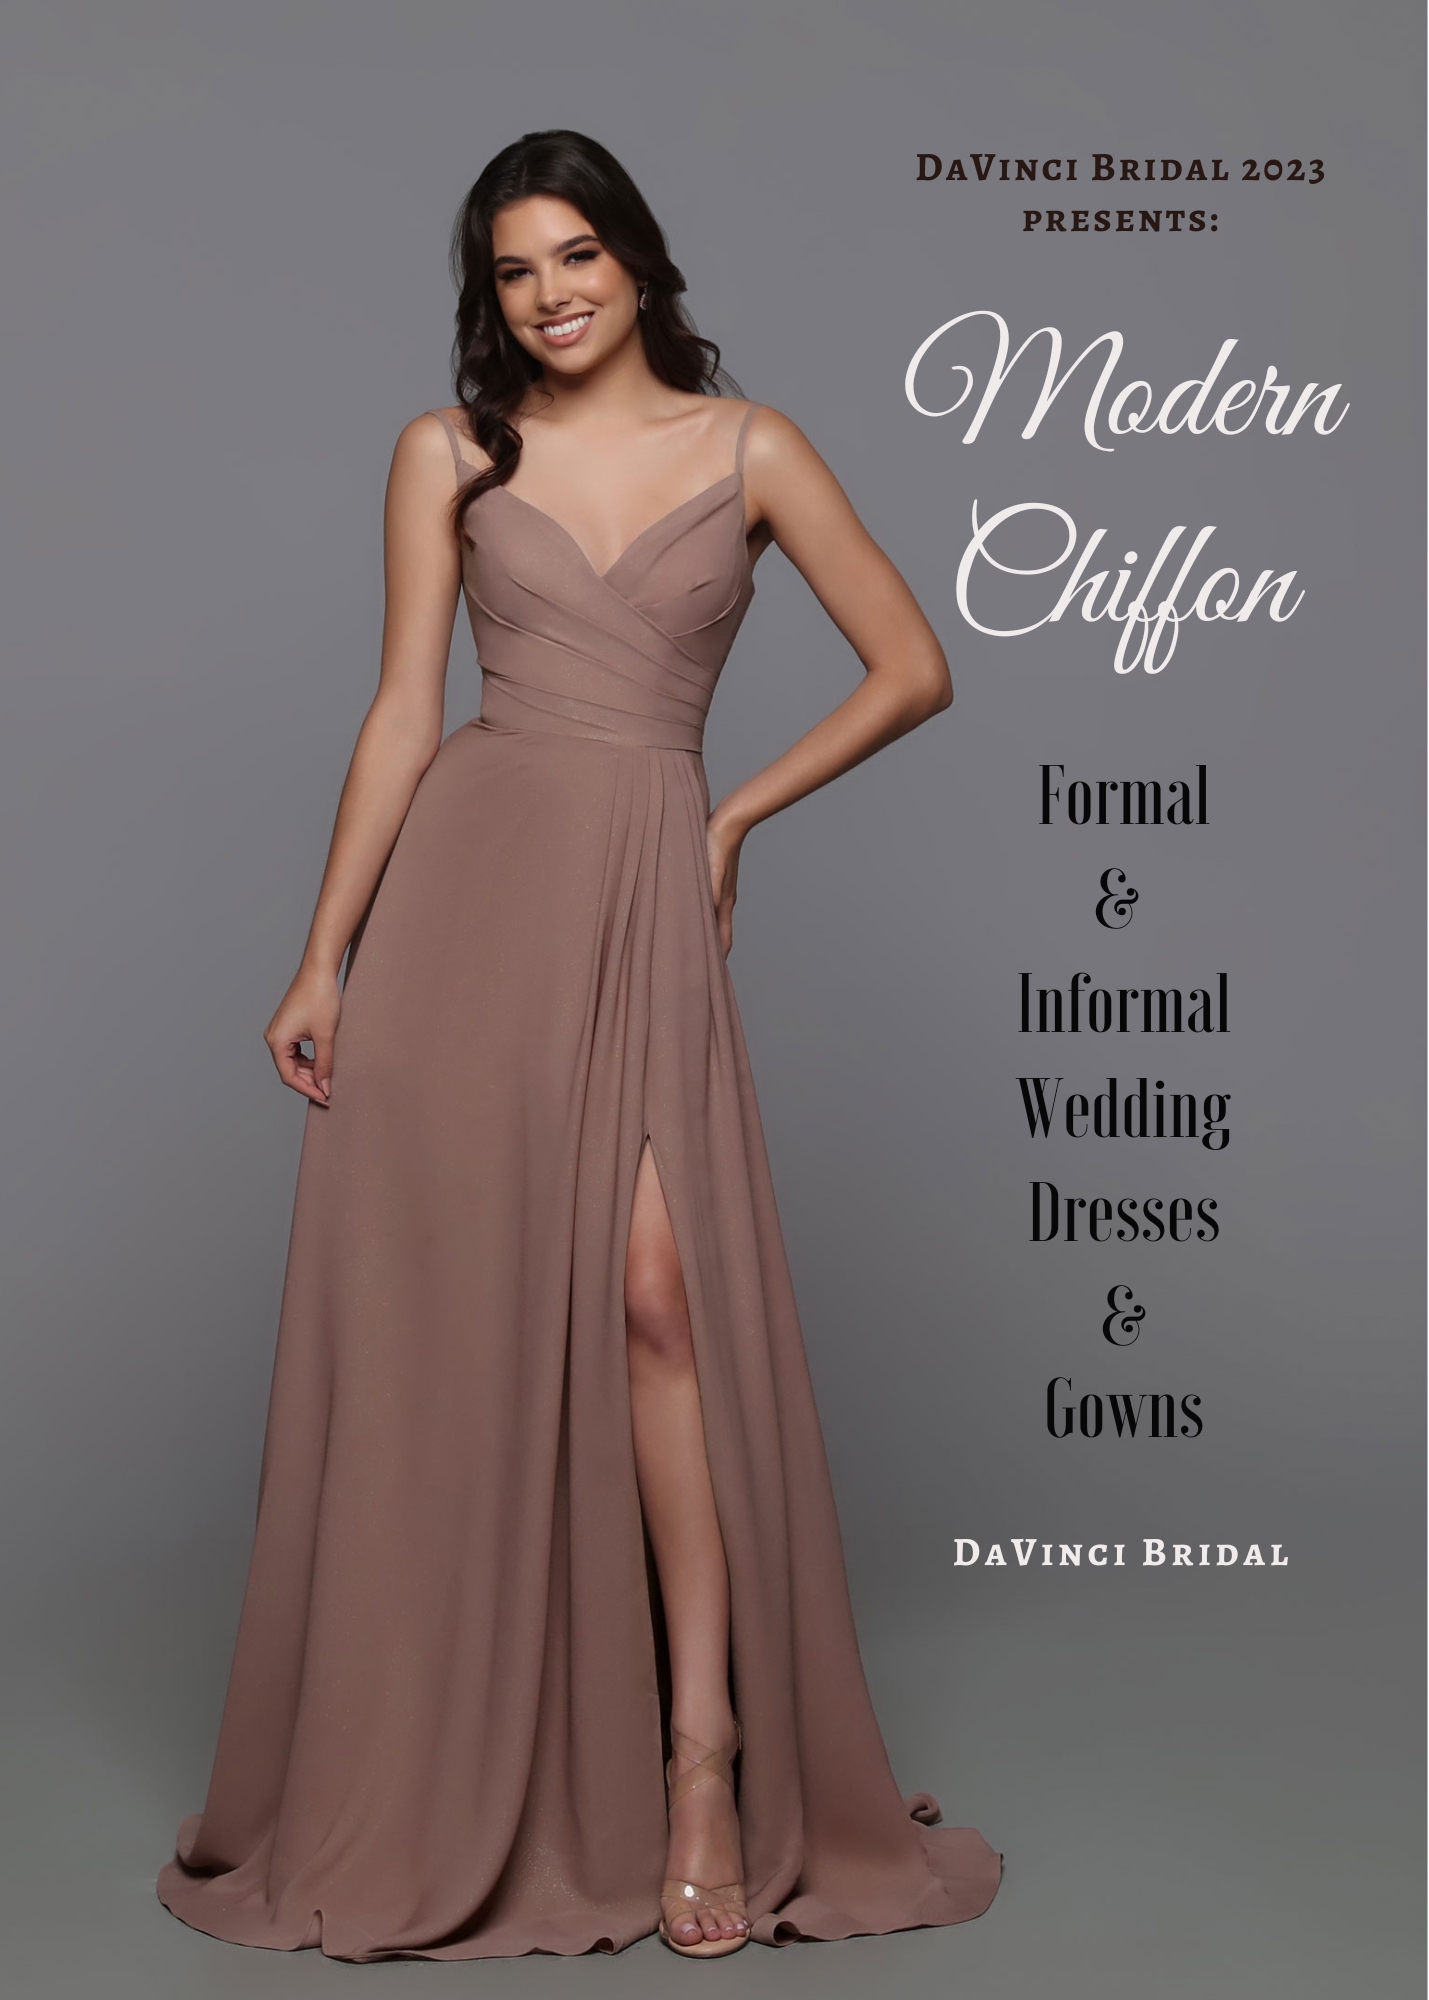 5 Trending Bridesmaid Dress Styles for 2024